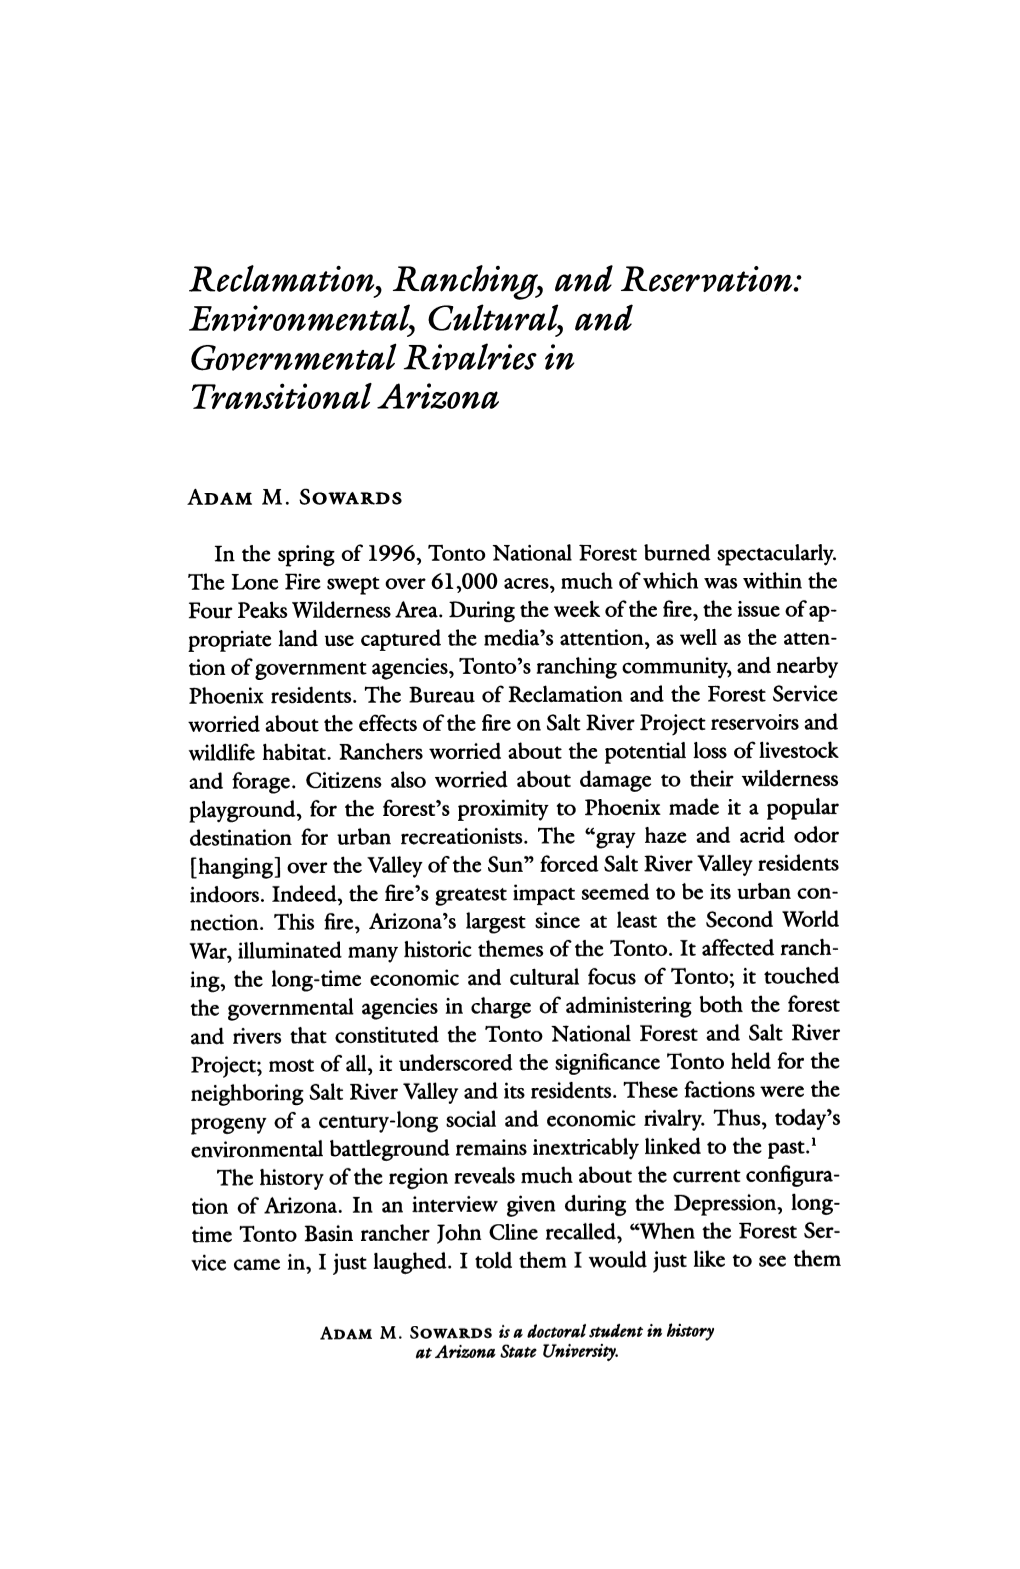 Reclamation, Ranching, and Reservation: Environmental